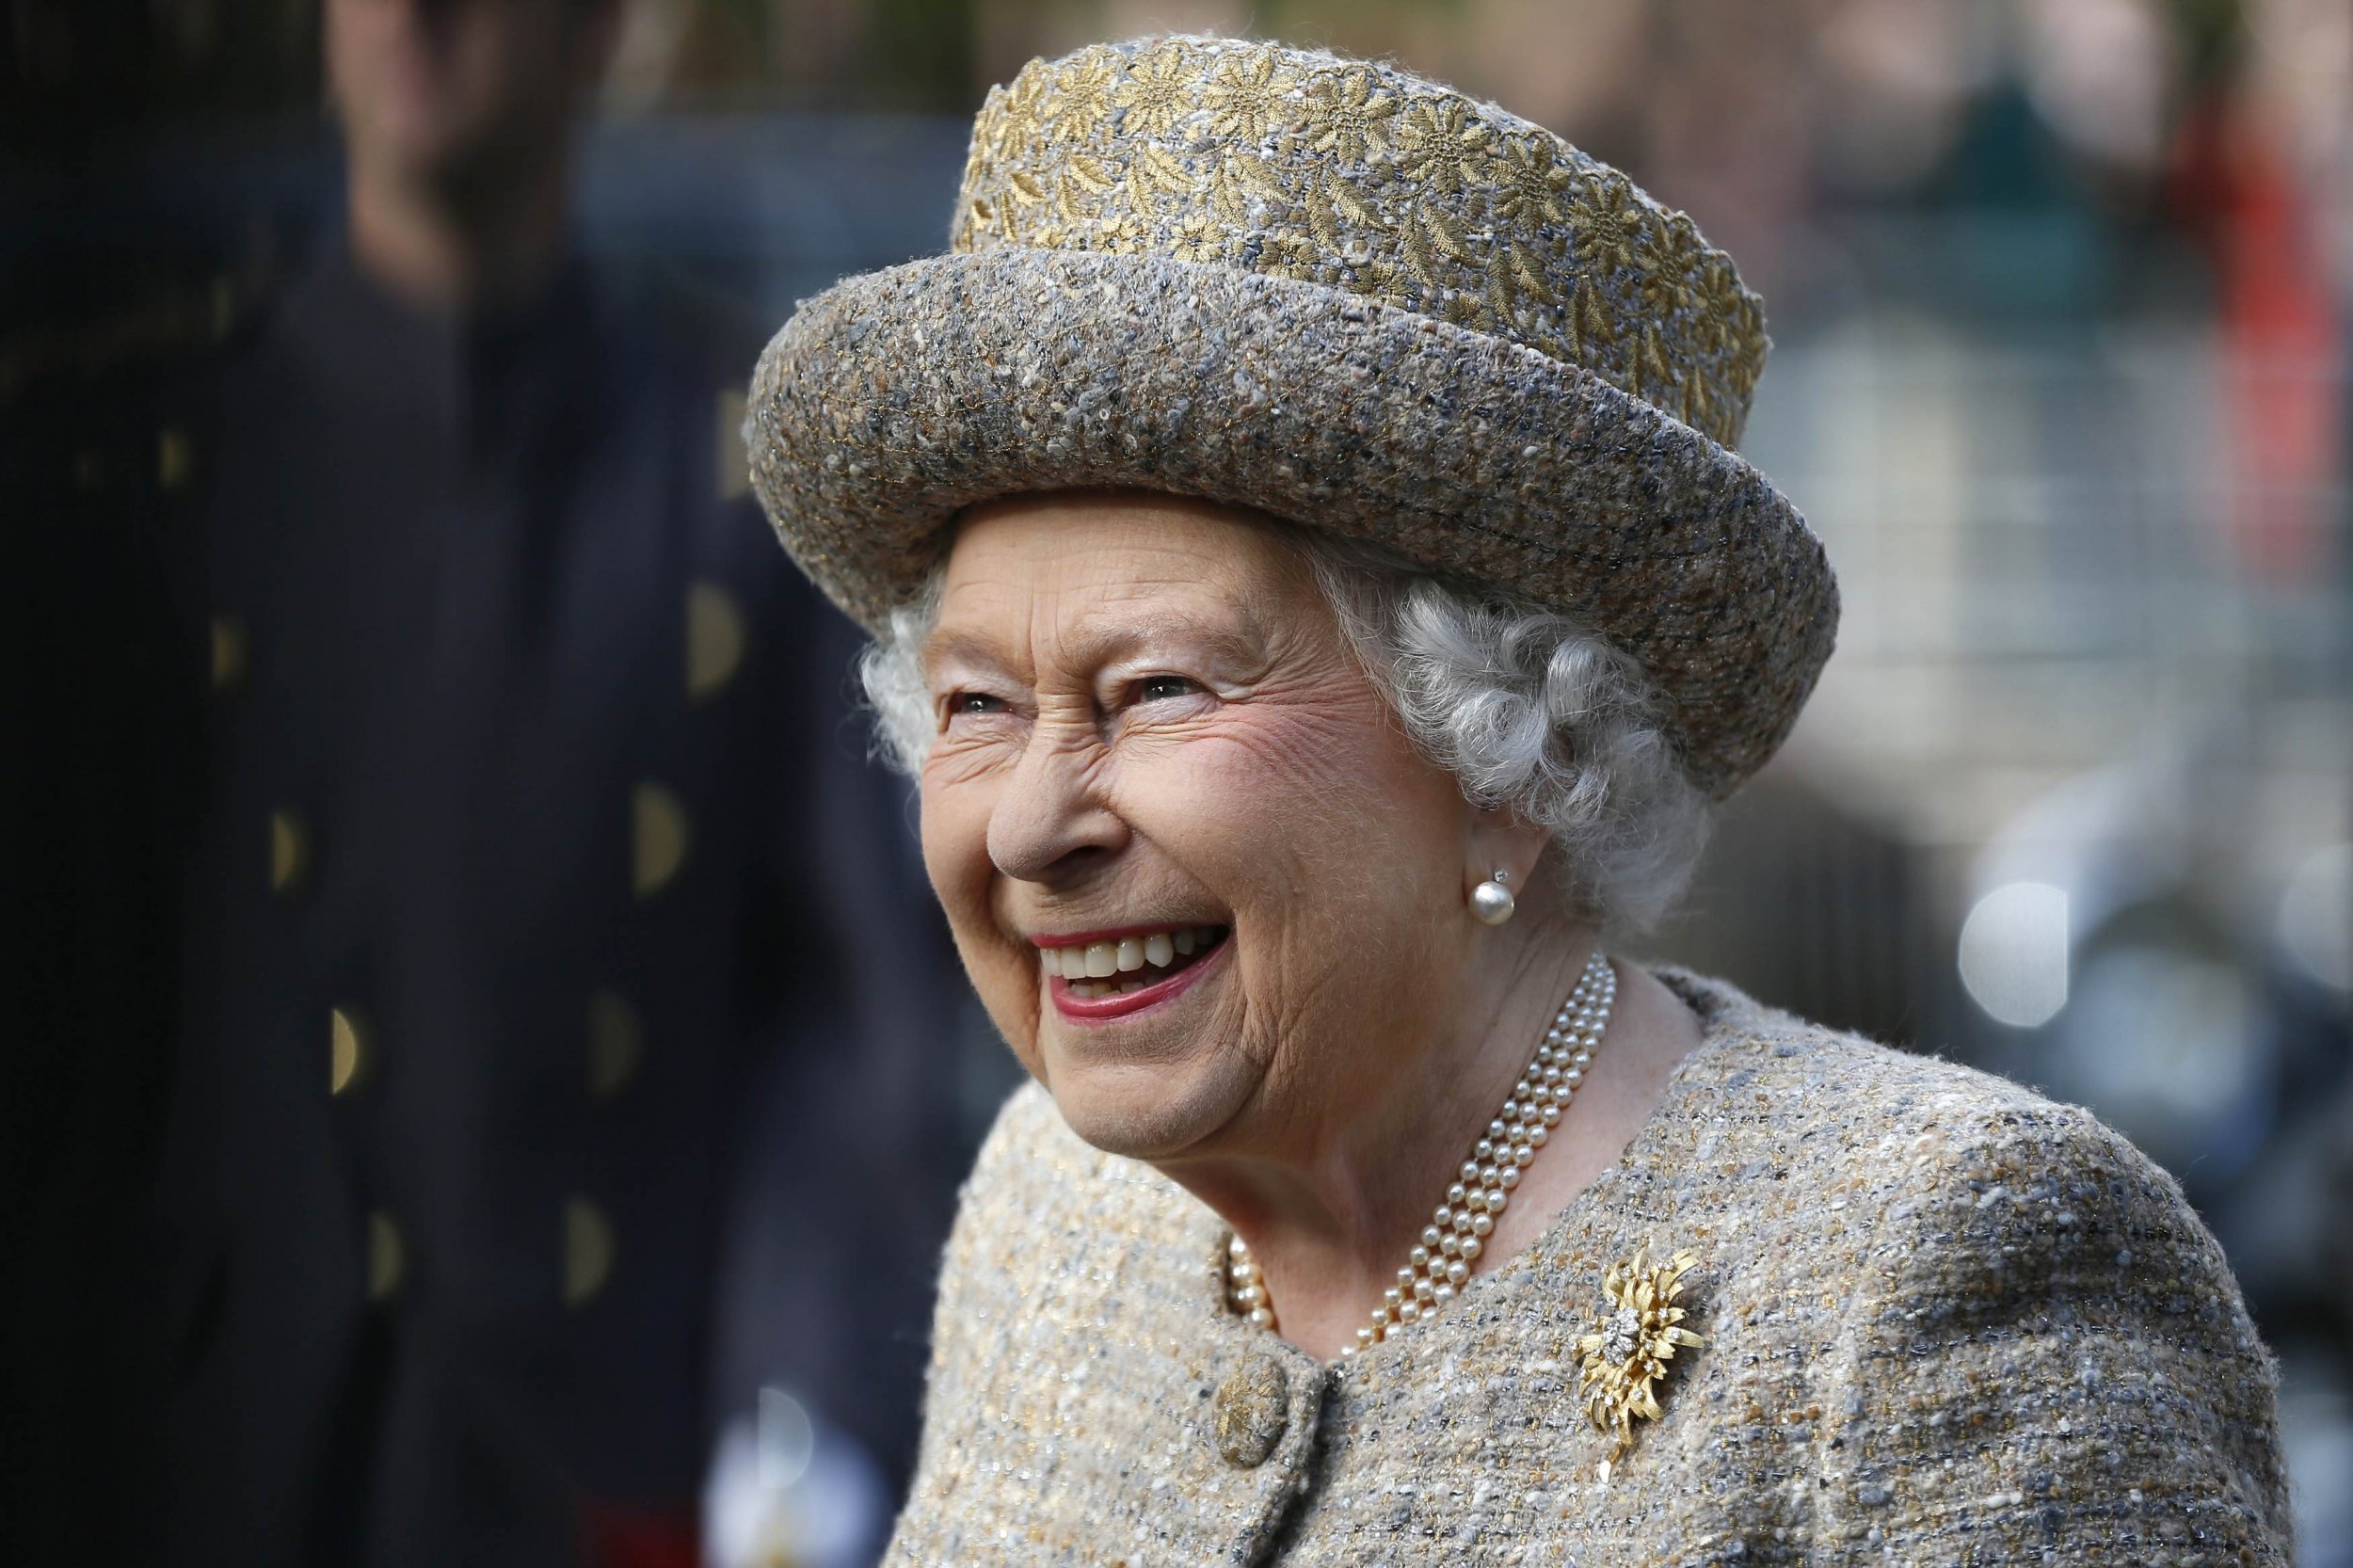 What Is Queen Elizabeth's Net Worth? Baby Archie Was Born Into a Royally Wealthy Family